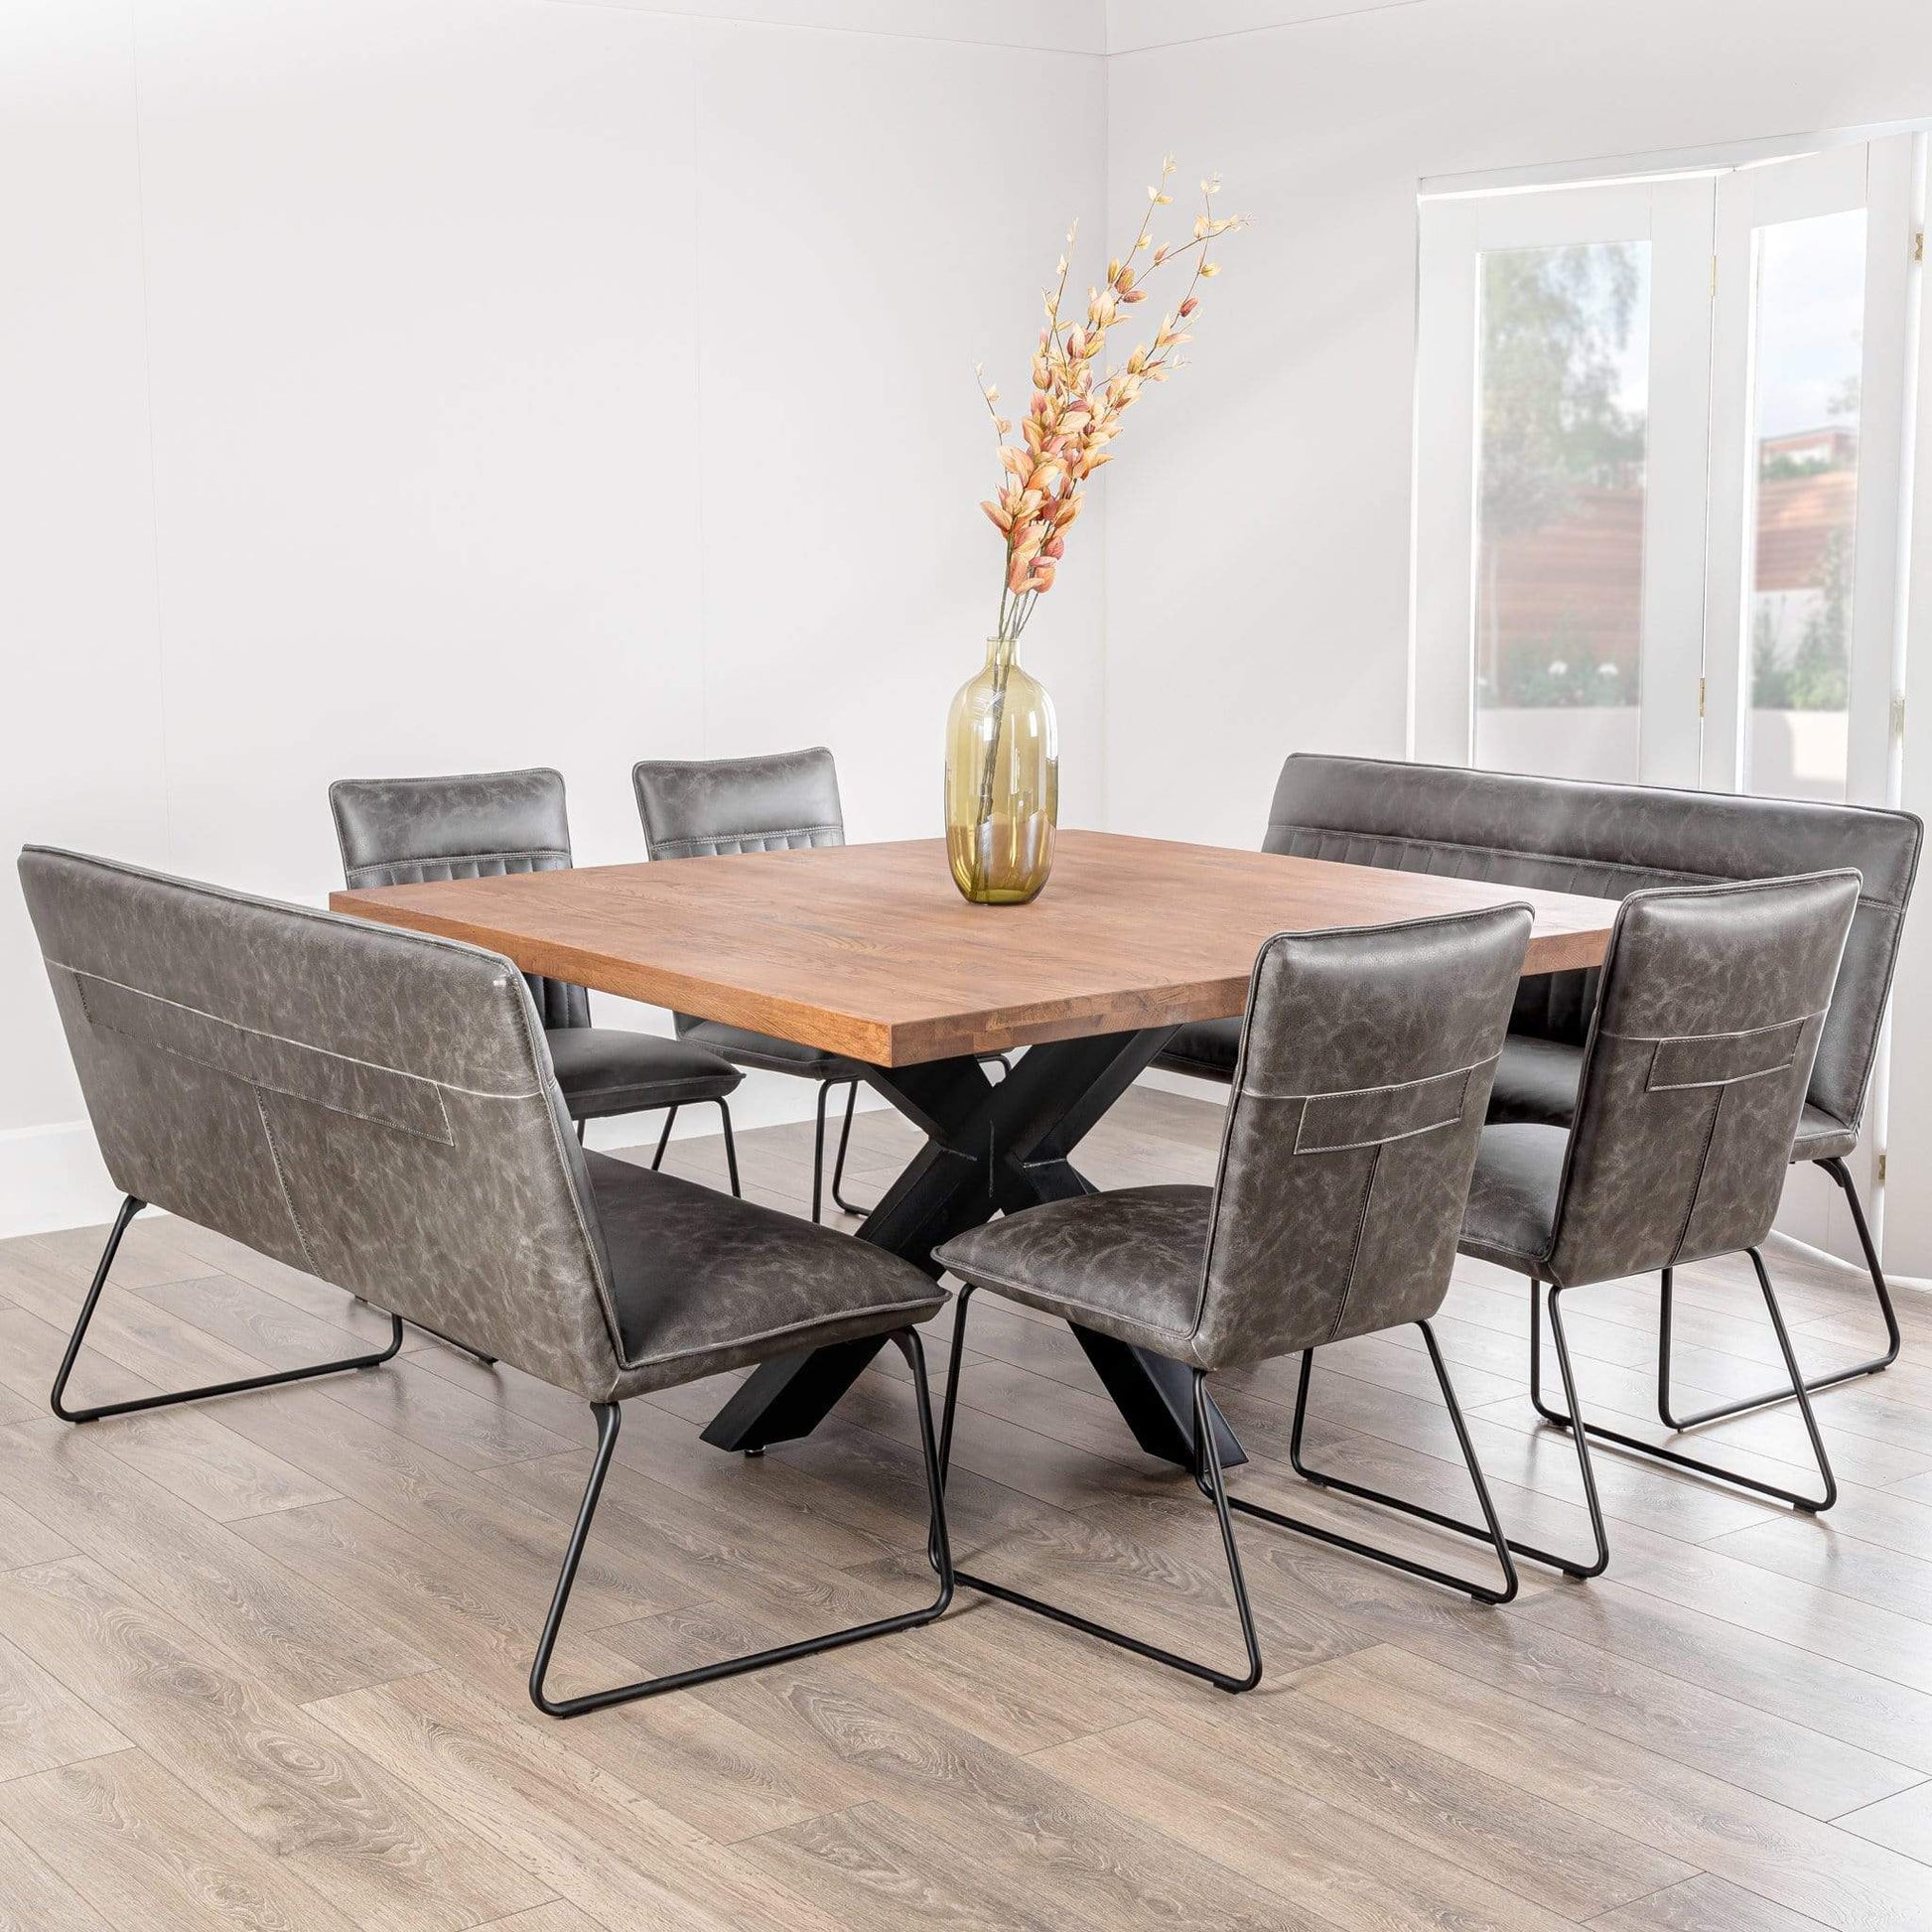 Furniture  -  Harrow Square Table With 4 Chairs & 2 Benches Dining Set  -  50154028